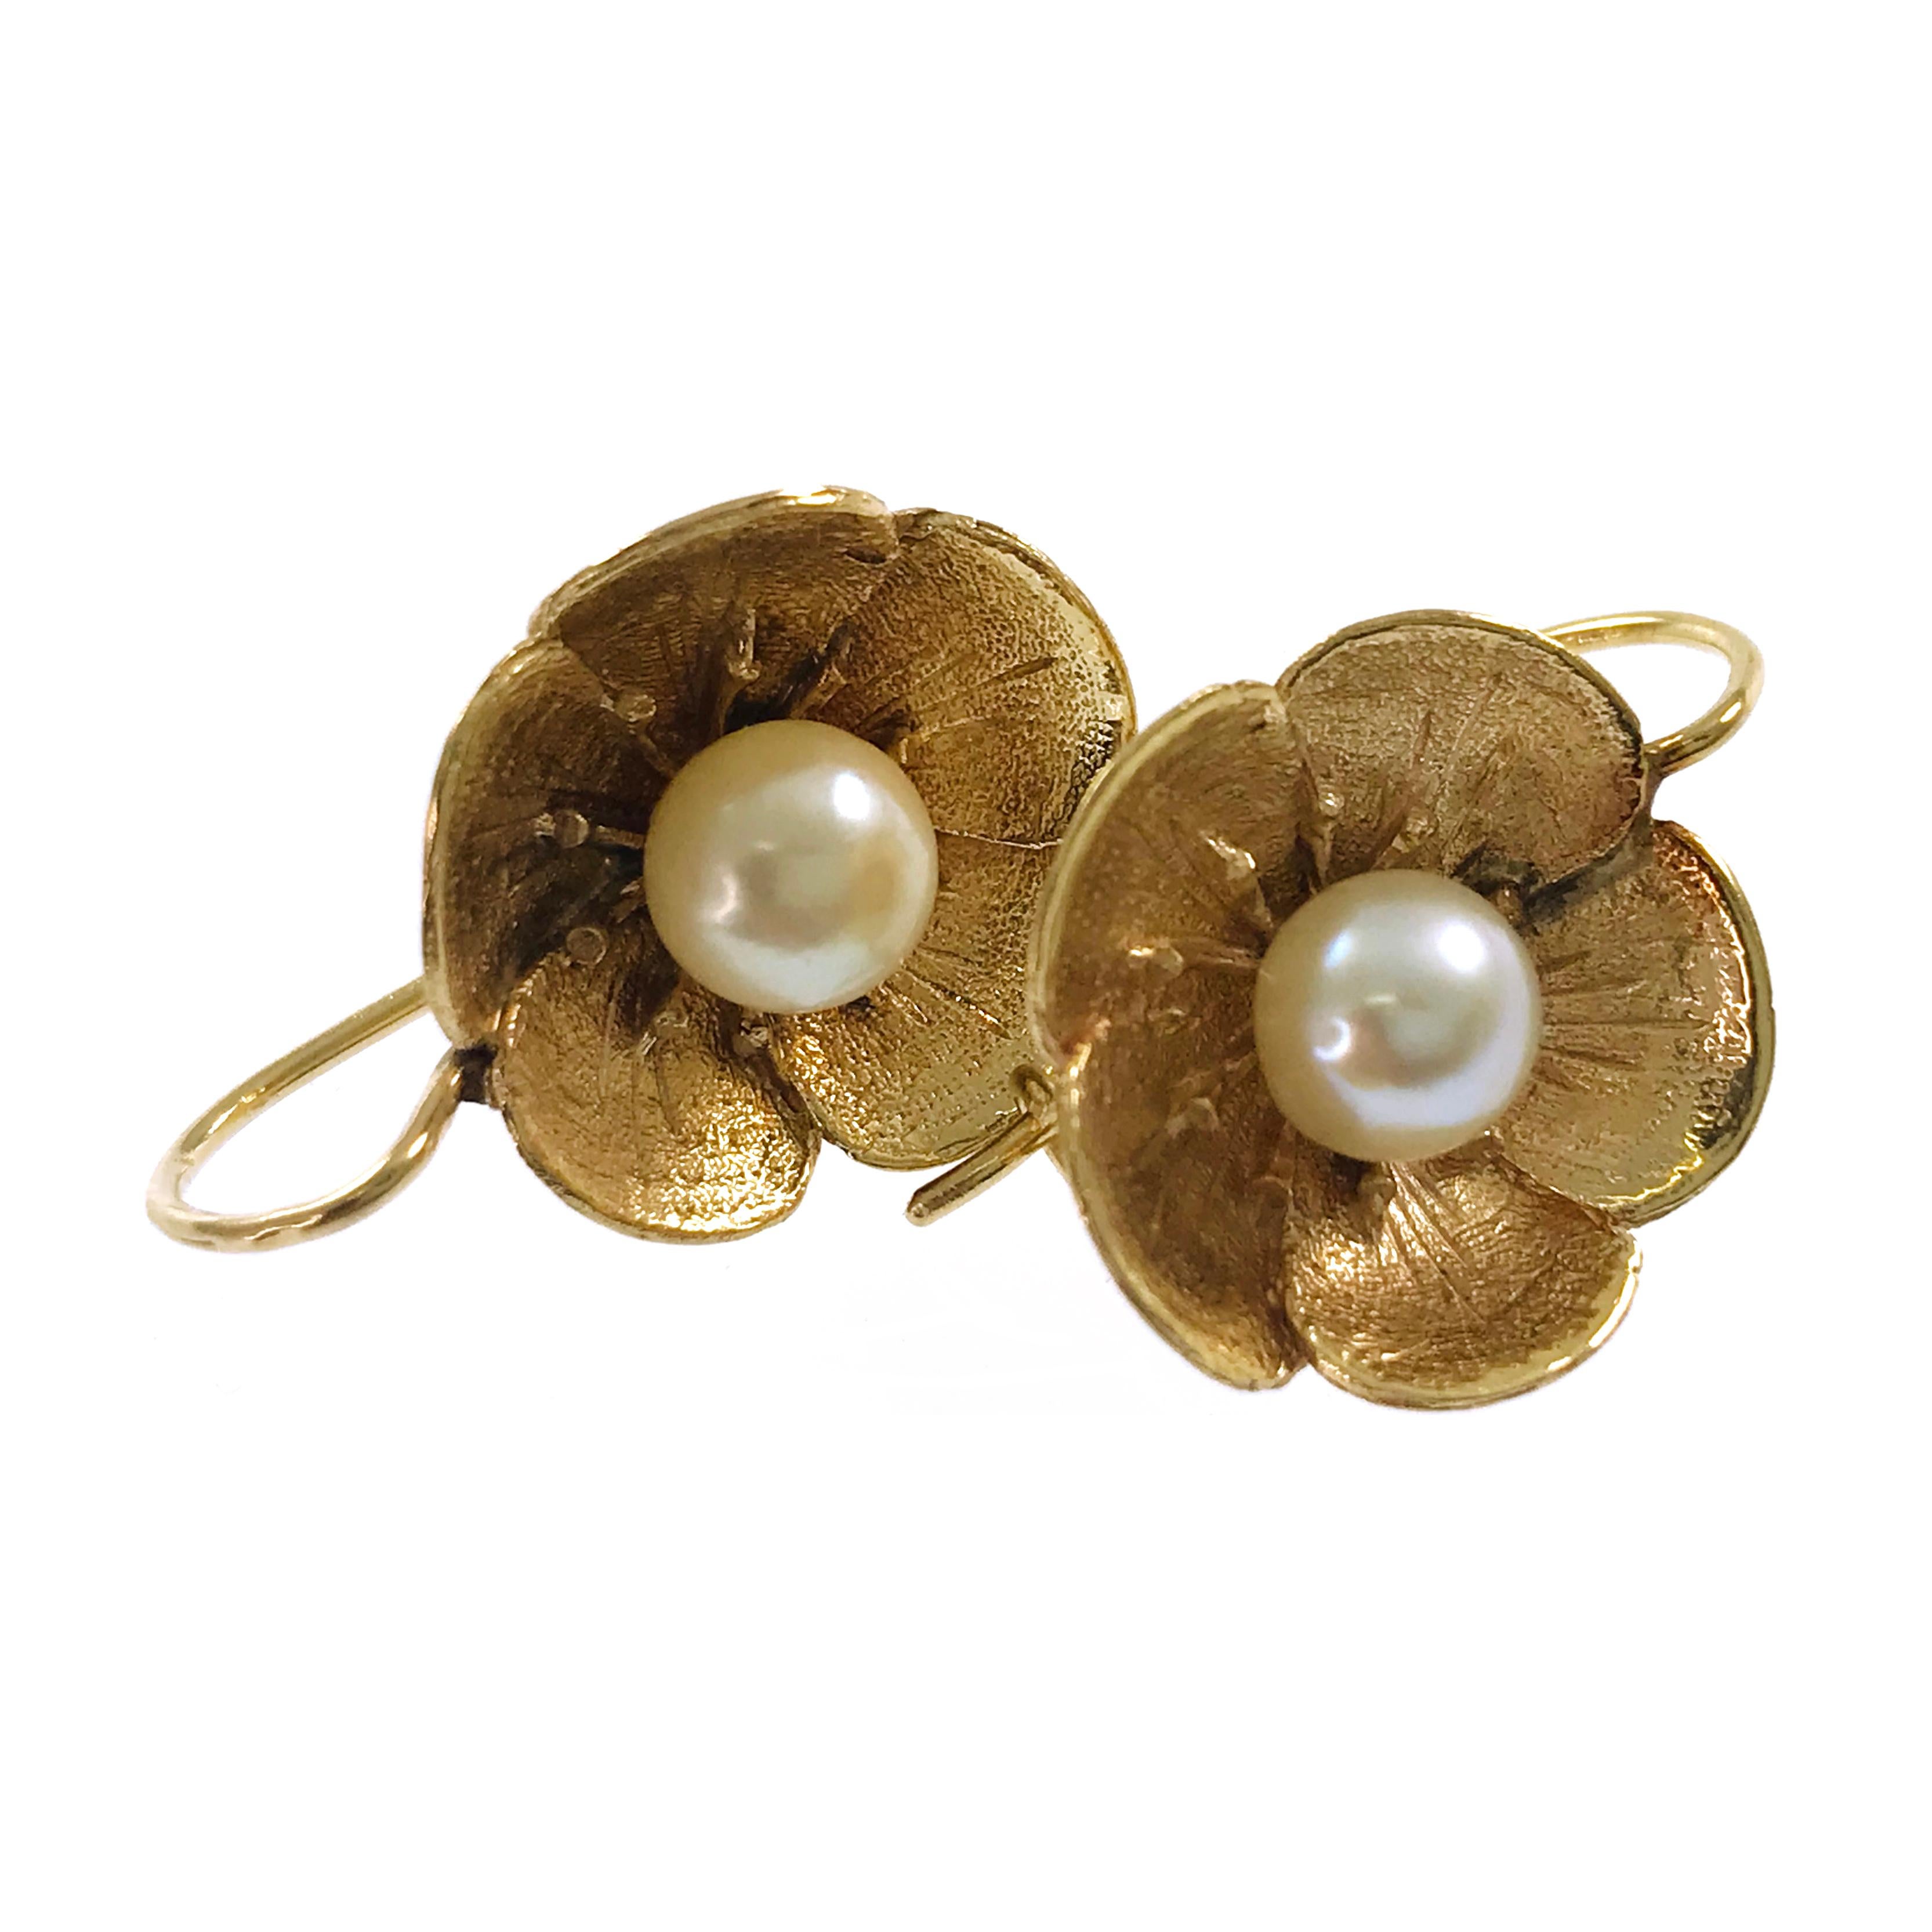 14 Karat Flower Pearl Earrings. These antique earrings are darling and delicate with a textured front and smooth back and a center pearl. 6mm Pearls are AA grade: Color range - white, creamy; clean; good shape; good luster. Stamped on the back of